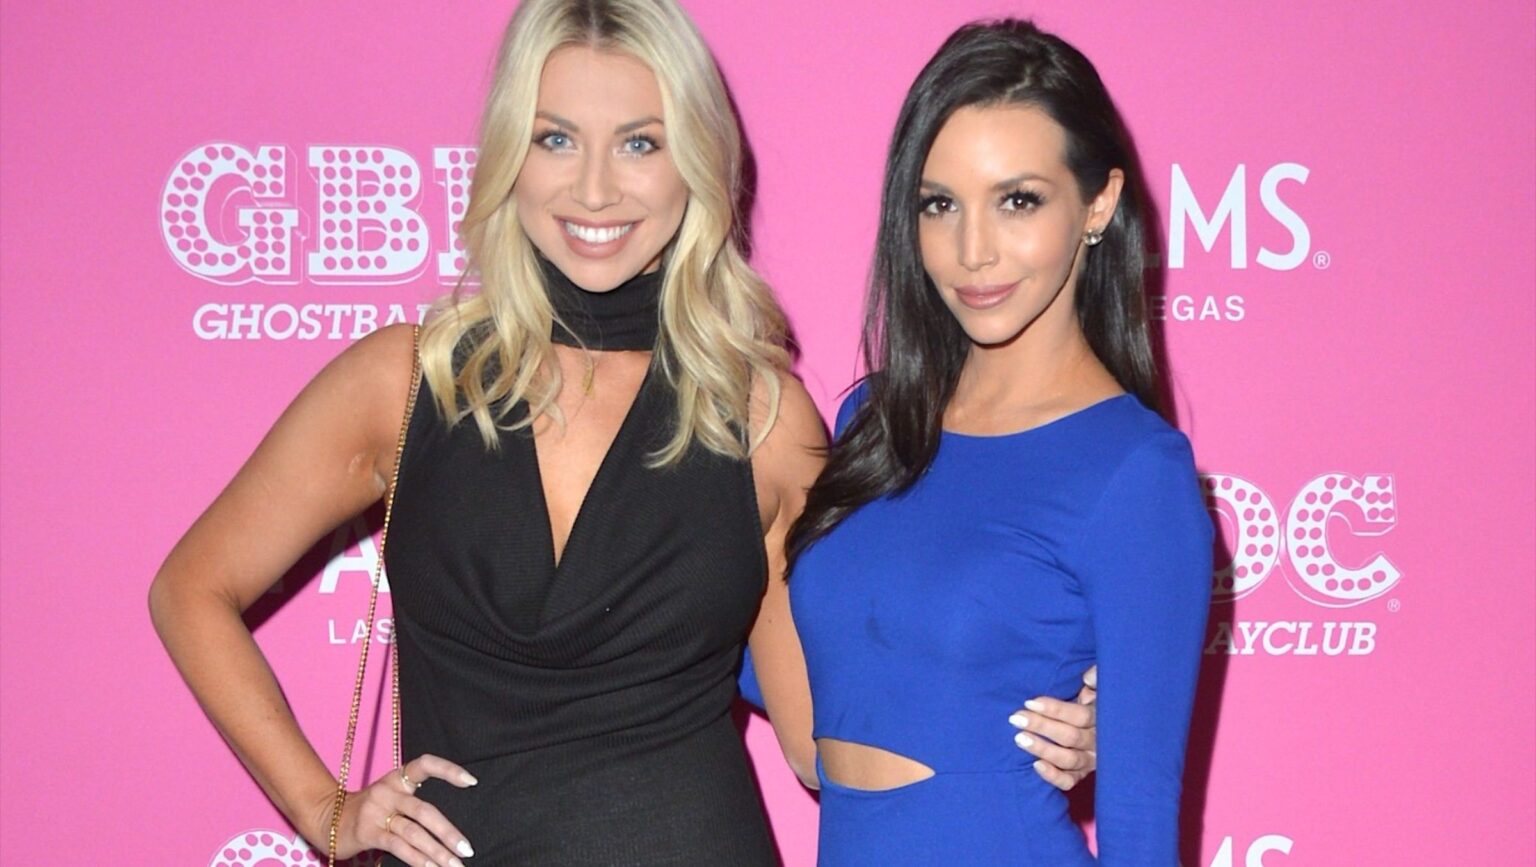 'Vanderpump Rules' stars Stassi Schroeder & Scheana Shay have a long history of backstabbing. Here's some insight on their latest feud.